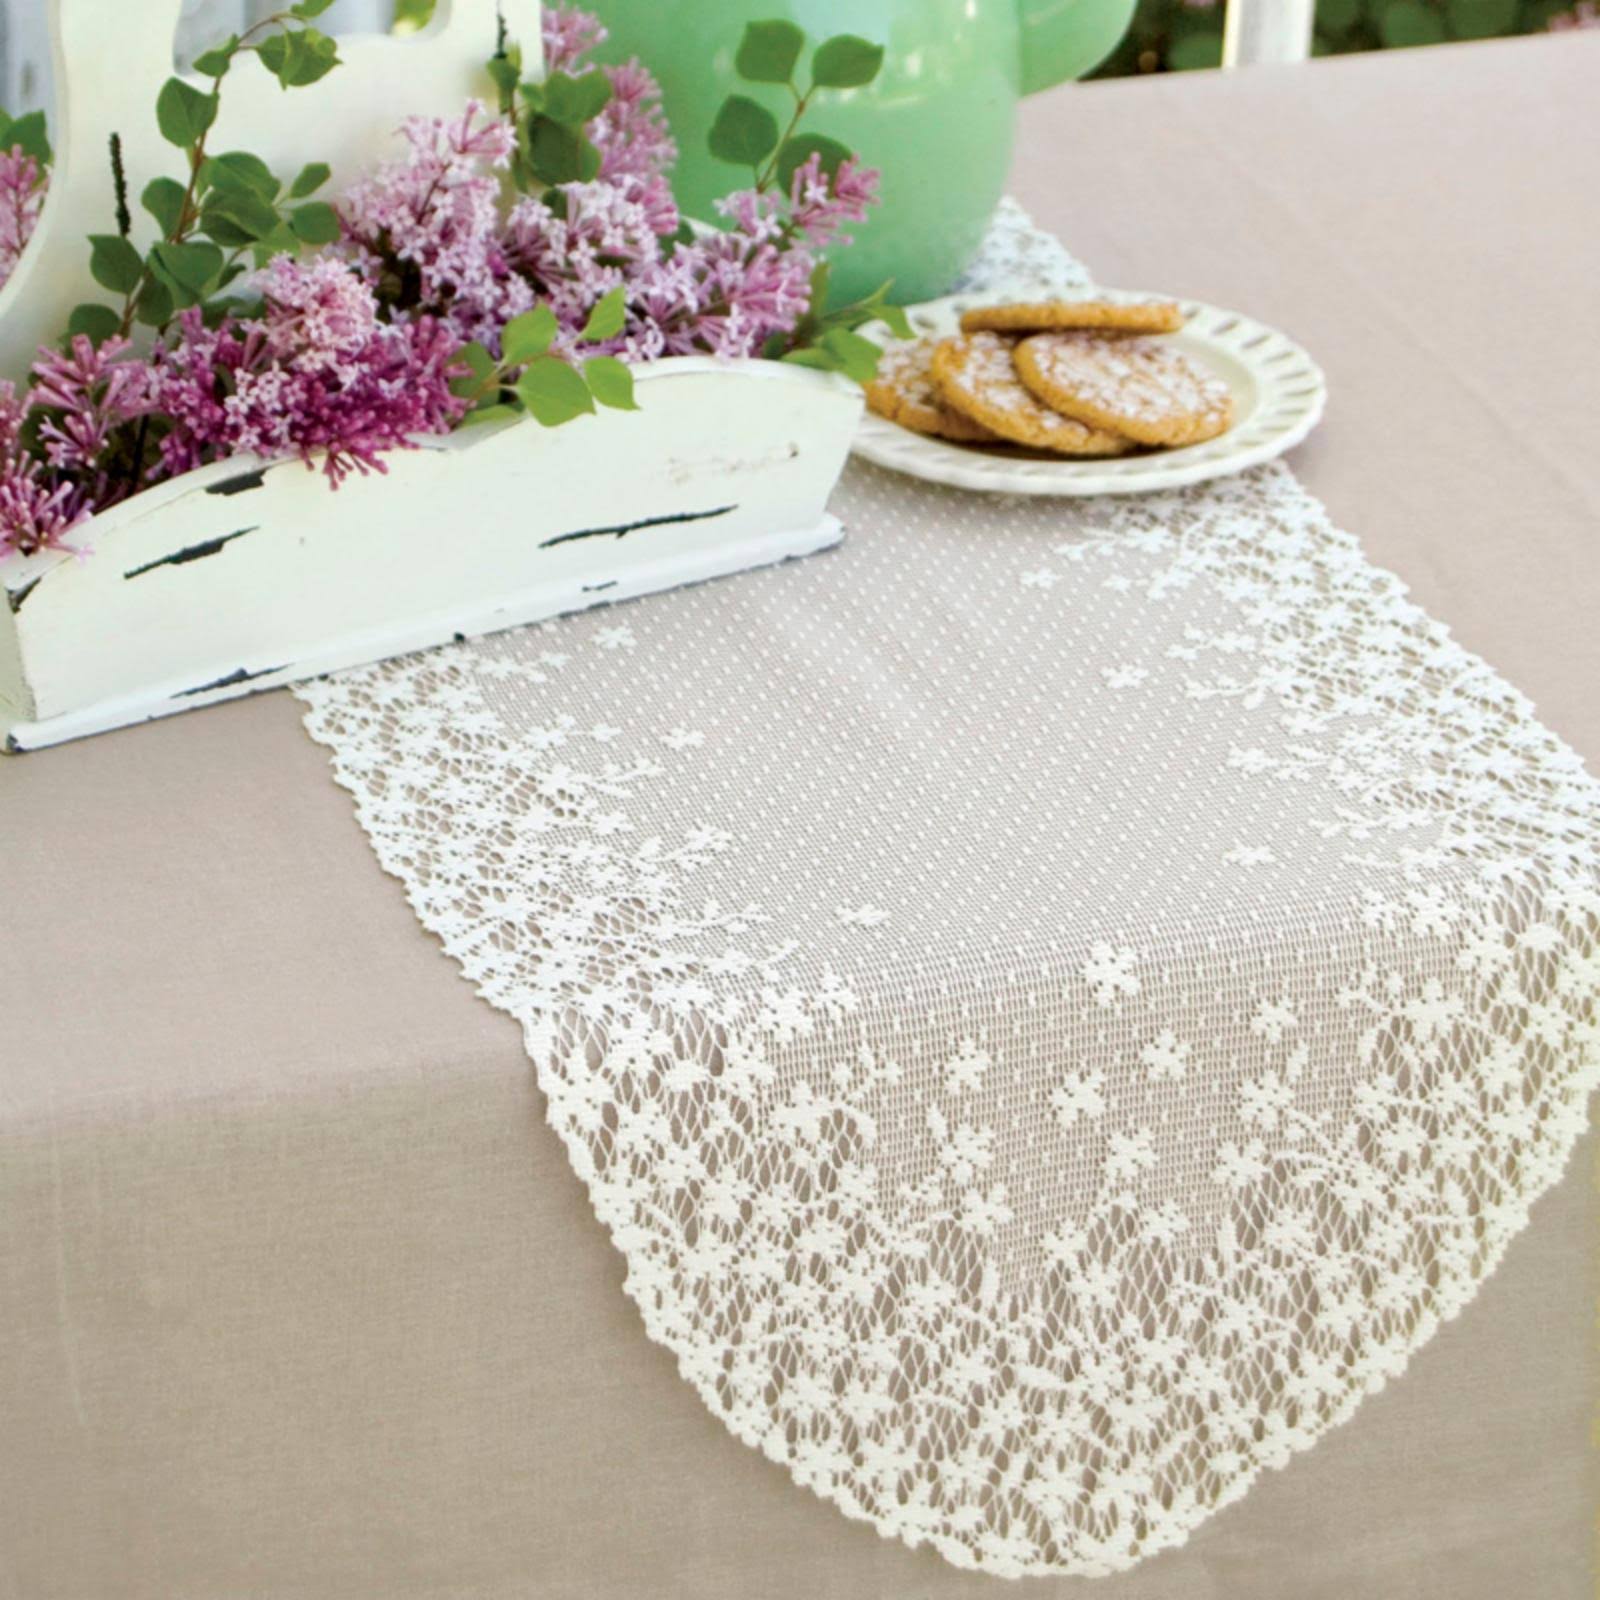 Heritage Lace, White Blossom 12x30 Runner, 12 inch by 30 inch